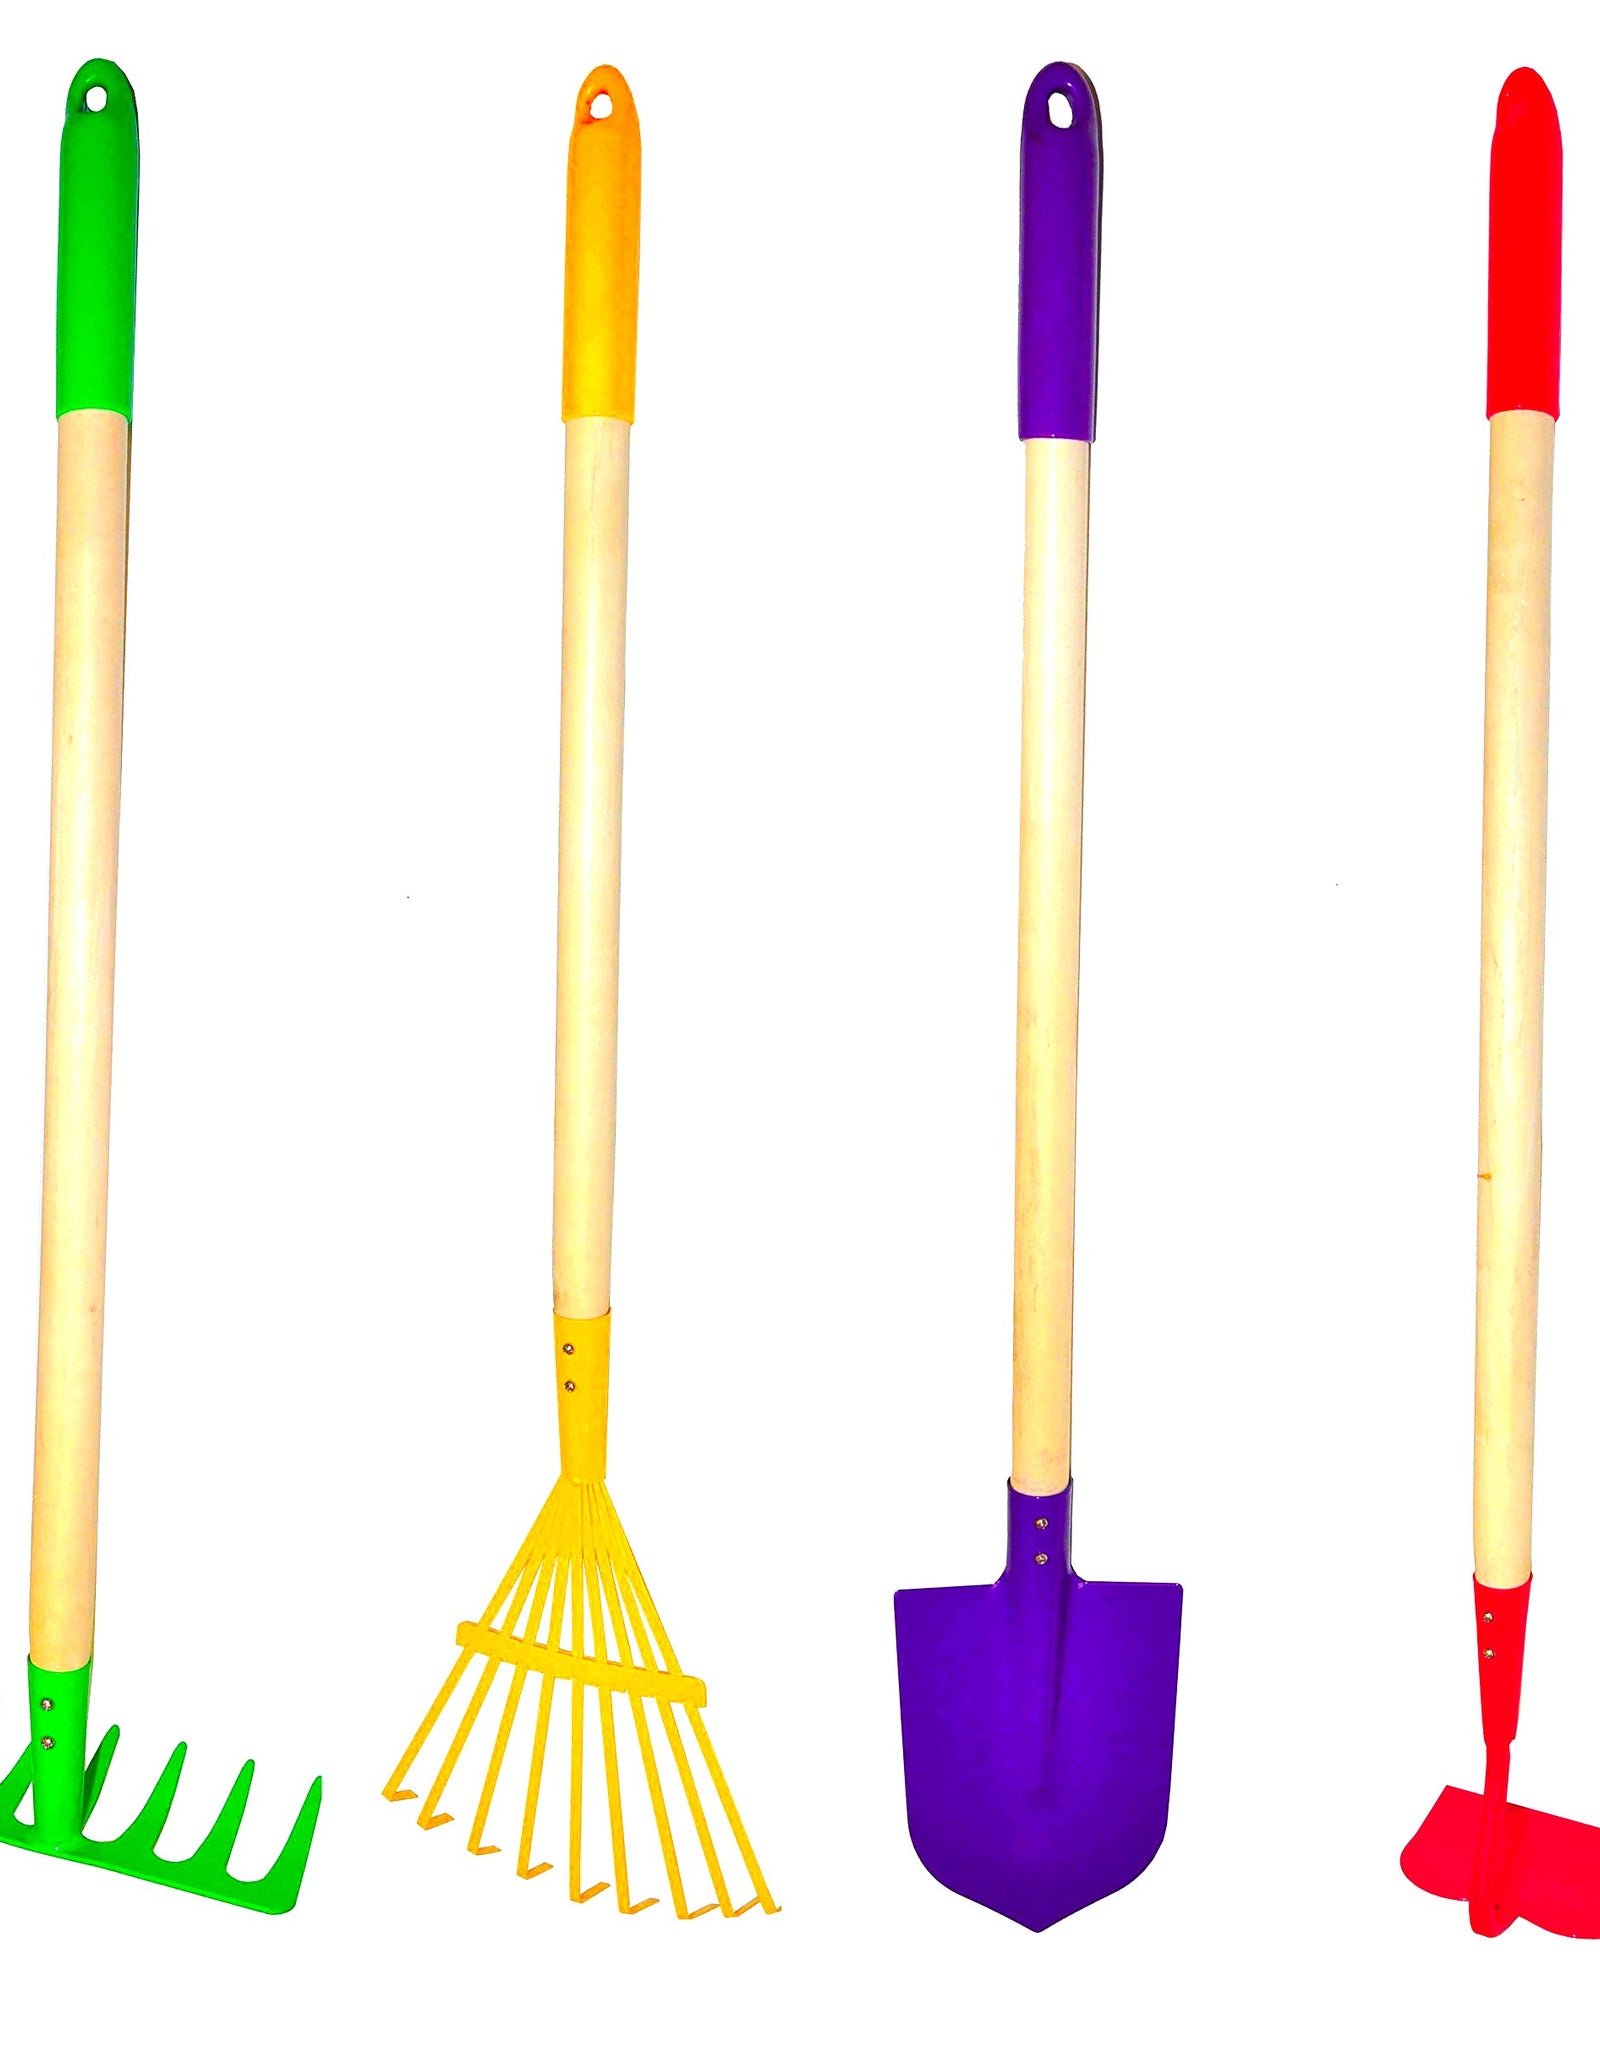 G & F JustForKids Kids Garden Tool Set Toy, Rake, Spade, Hoe and Leaf Rake, reduced size , made of sturdy steel heads and real wood handle, 4-Piece, Multicolored, 5yr+